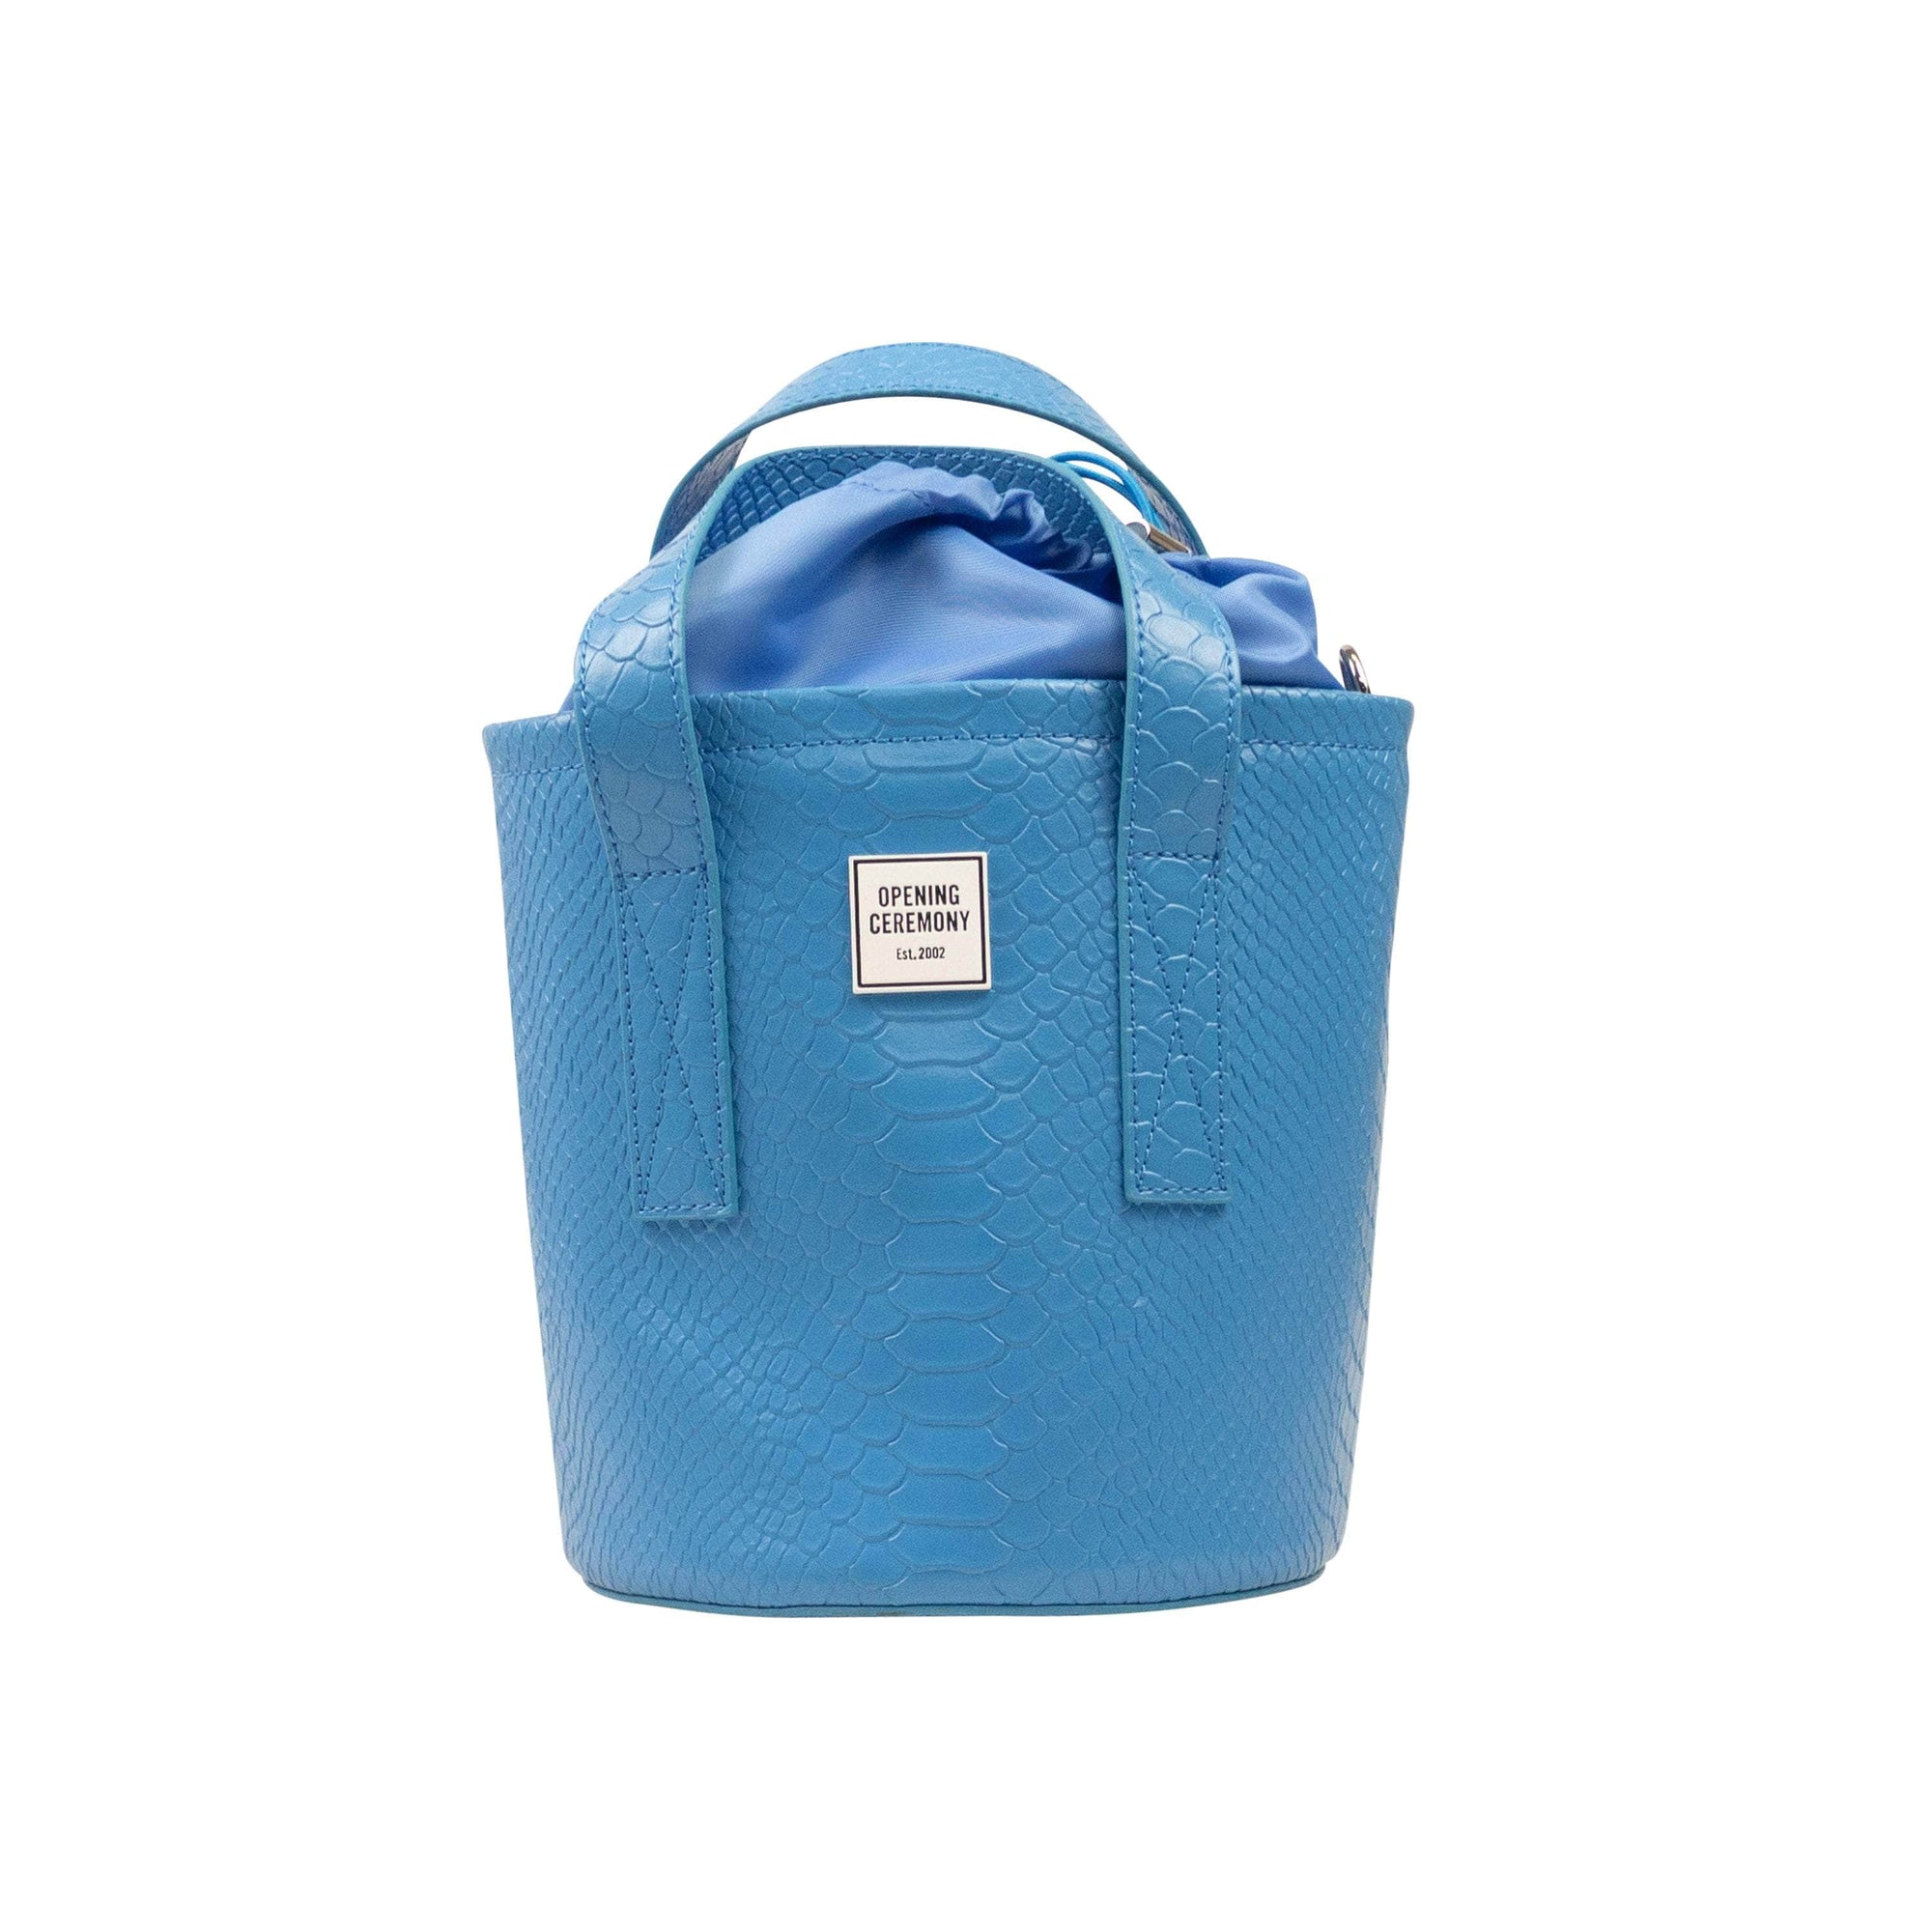 Opening Ceremony channelenable-all, chicmi, couponcollection, gender-womens, main-handbags OS Blue Medium Crocodile Bucket Bag 95-OCY-3160/OS 95-OCY-3160/OS